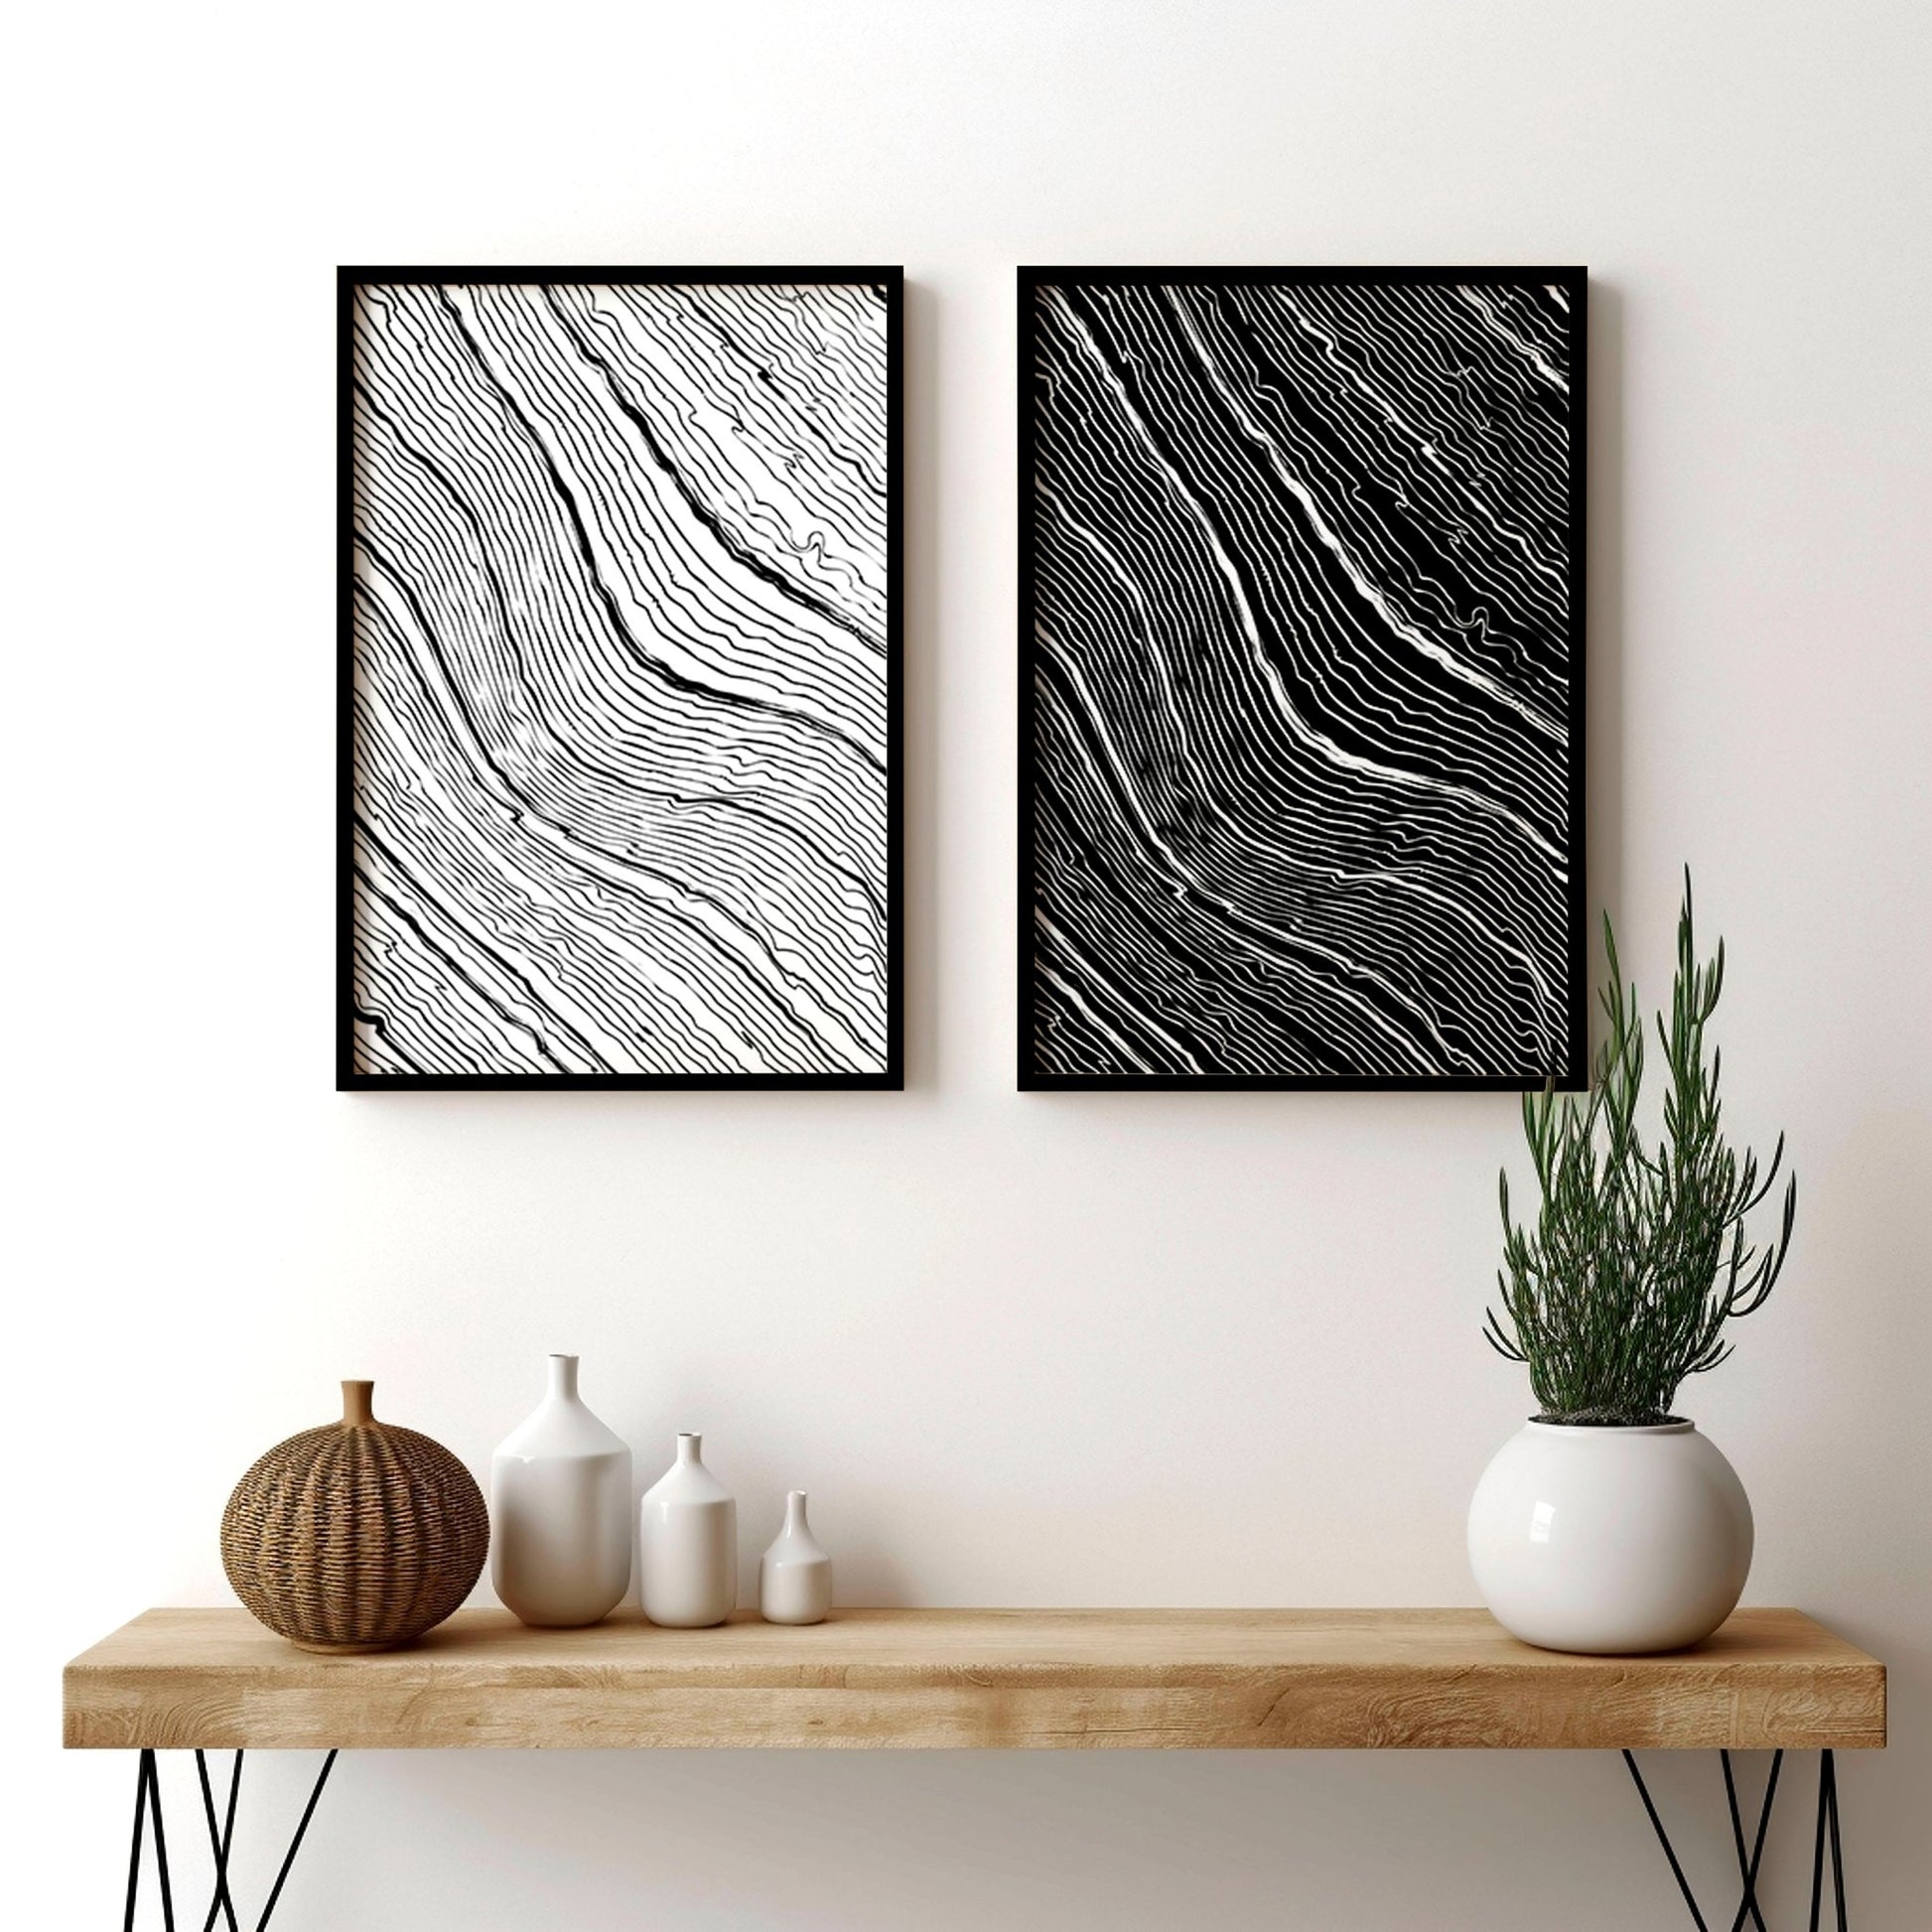 Black and white art wall | set of 2 wall art prints for living room - About Wall Art